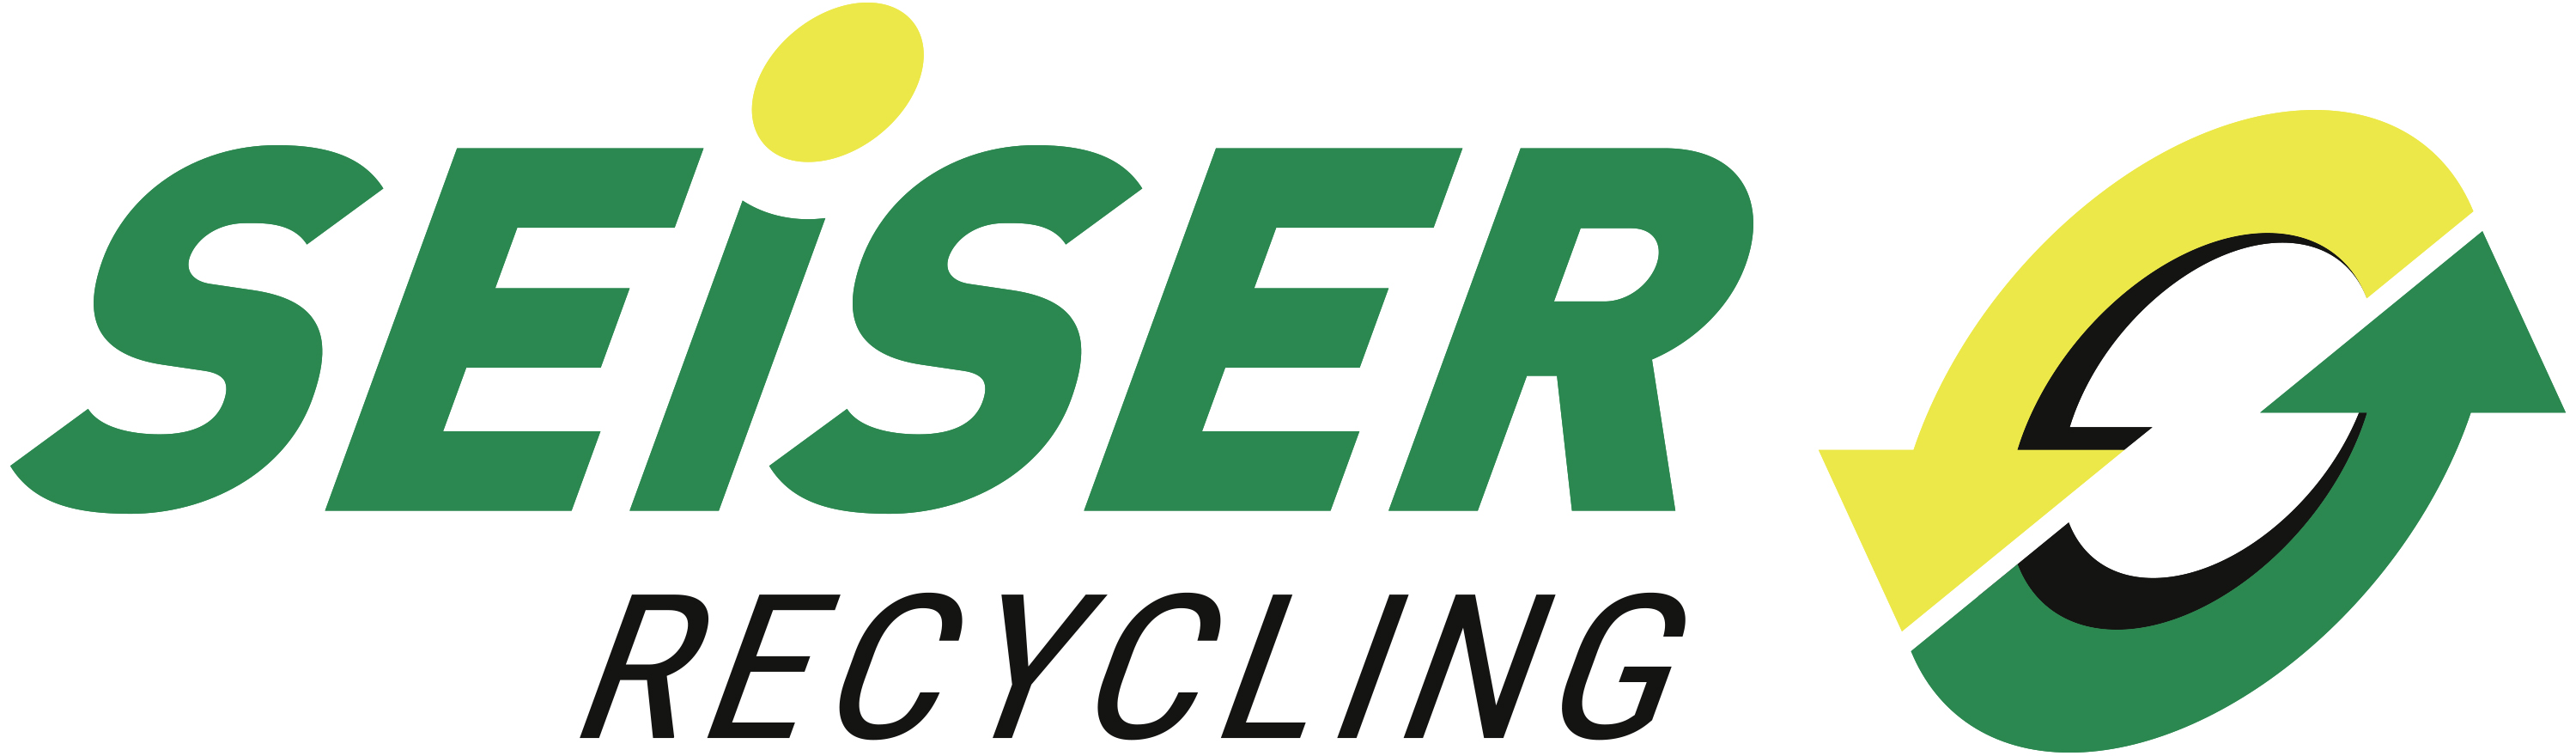 Seiser Recycling